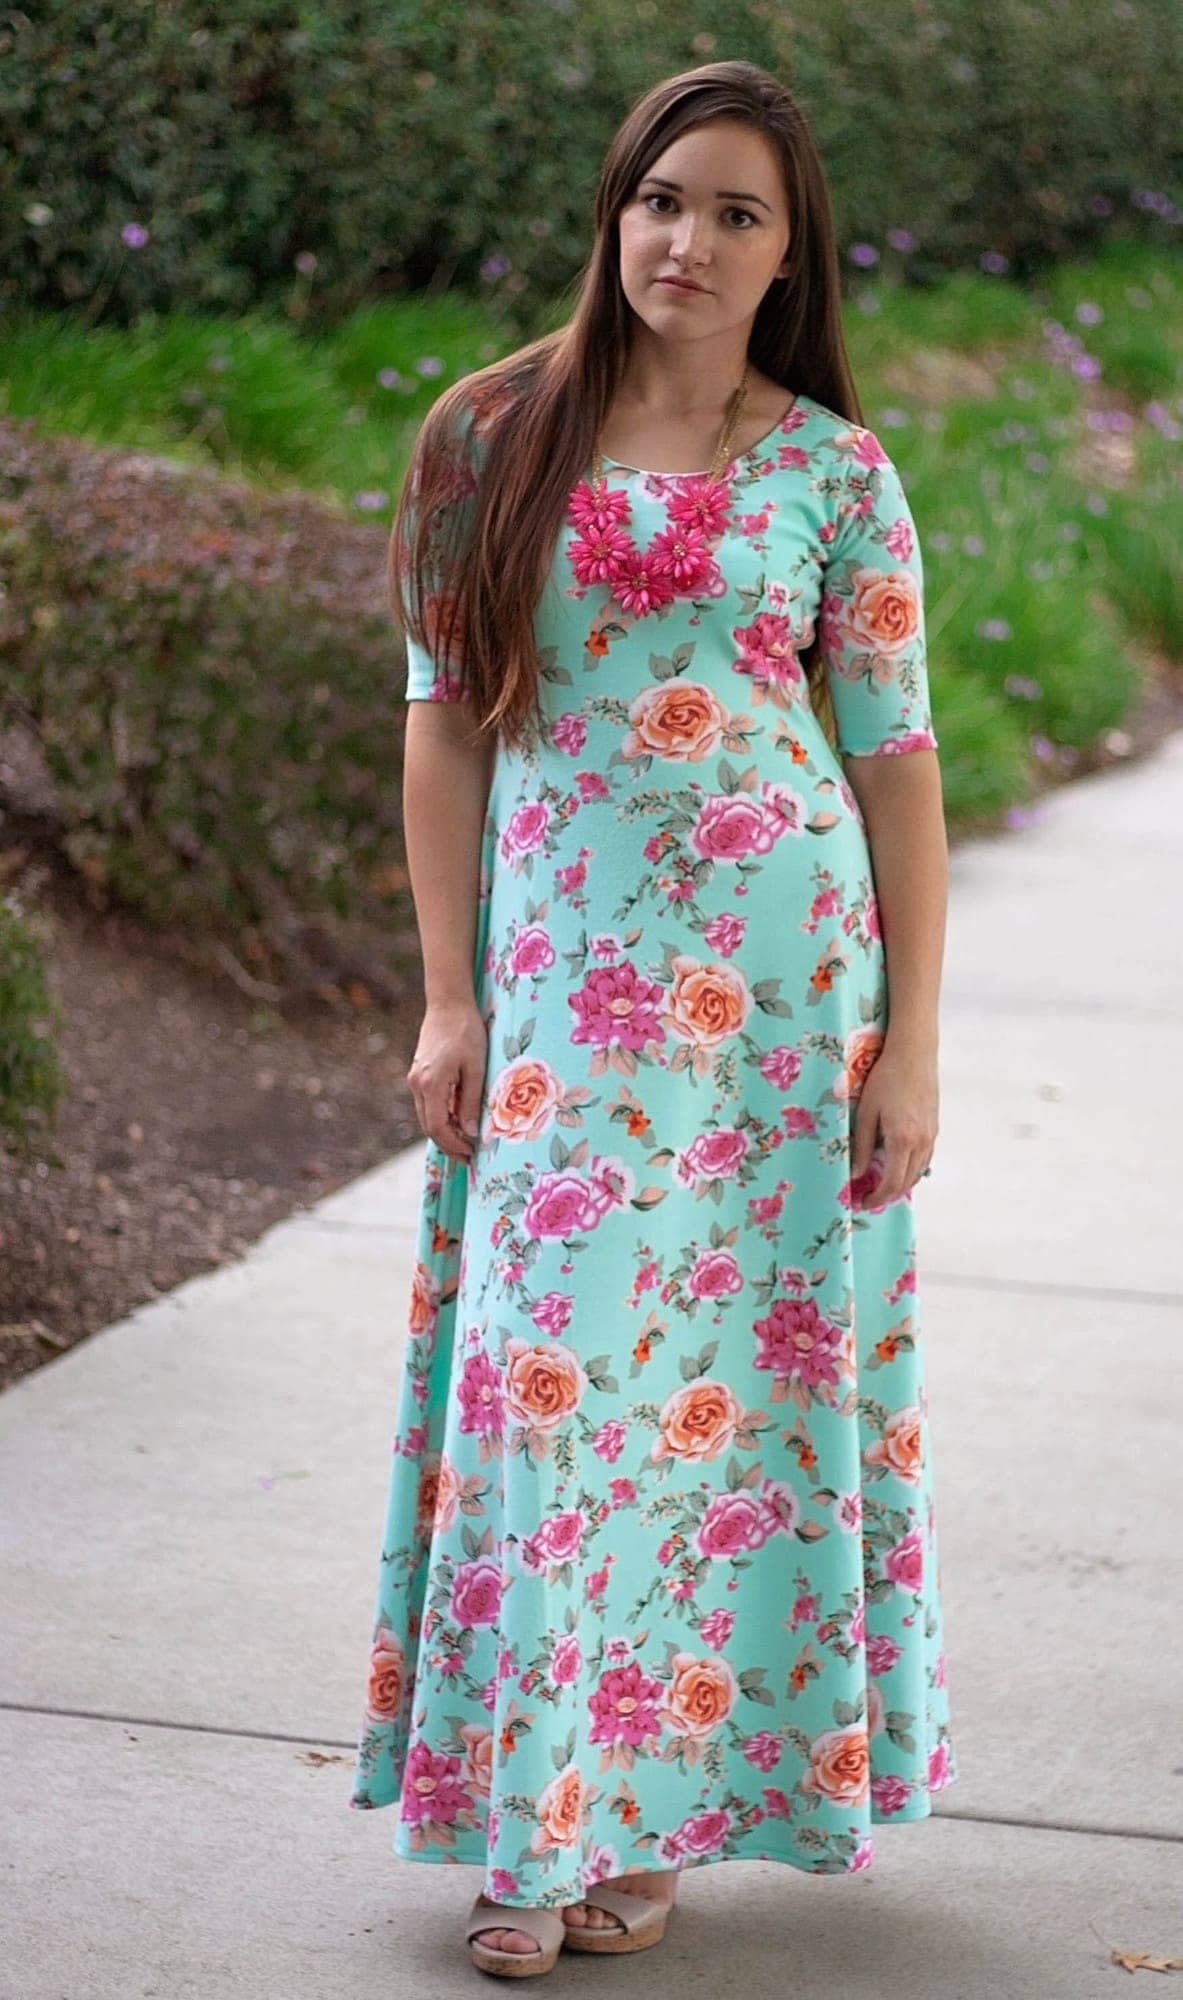 The Uptown/Downtown Dress & Fabric Giveaway - Sweet Red Poppy